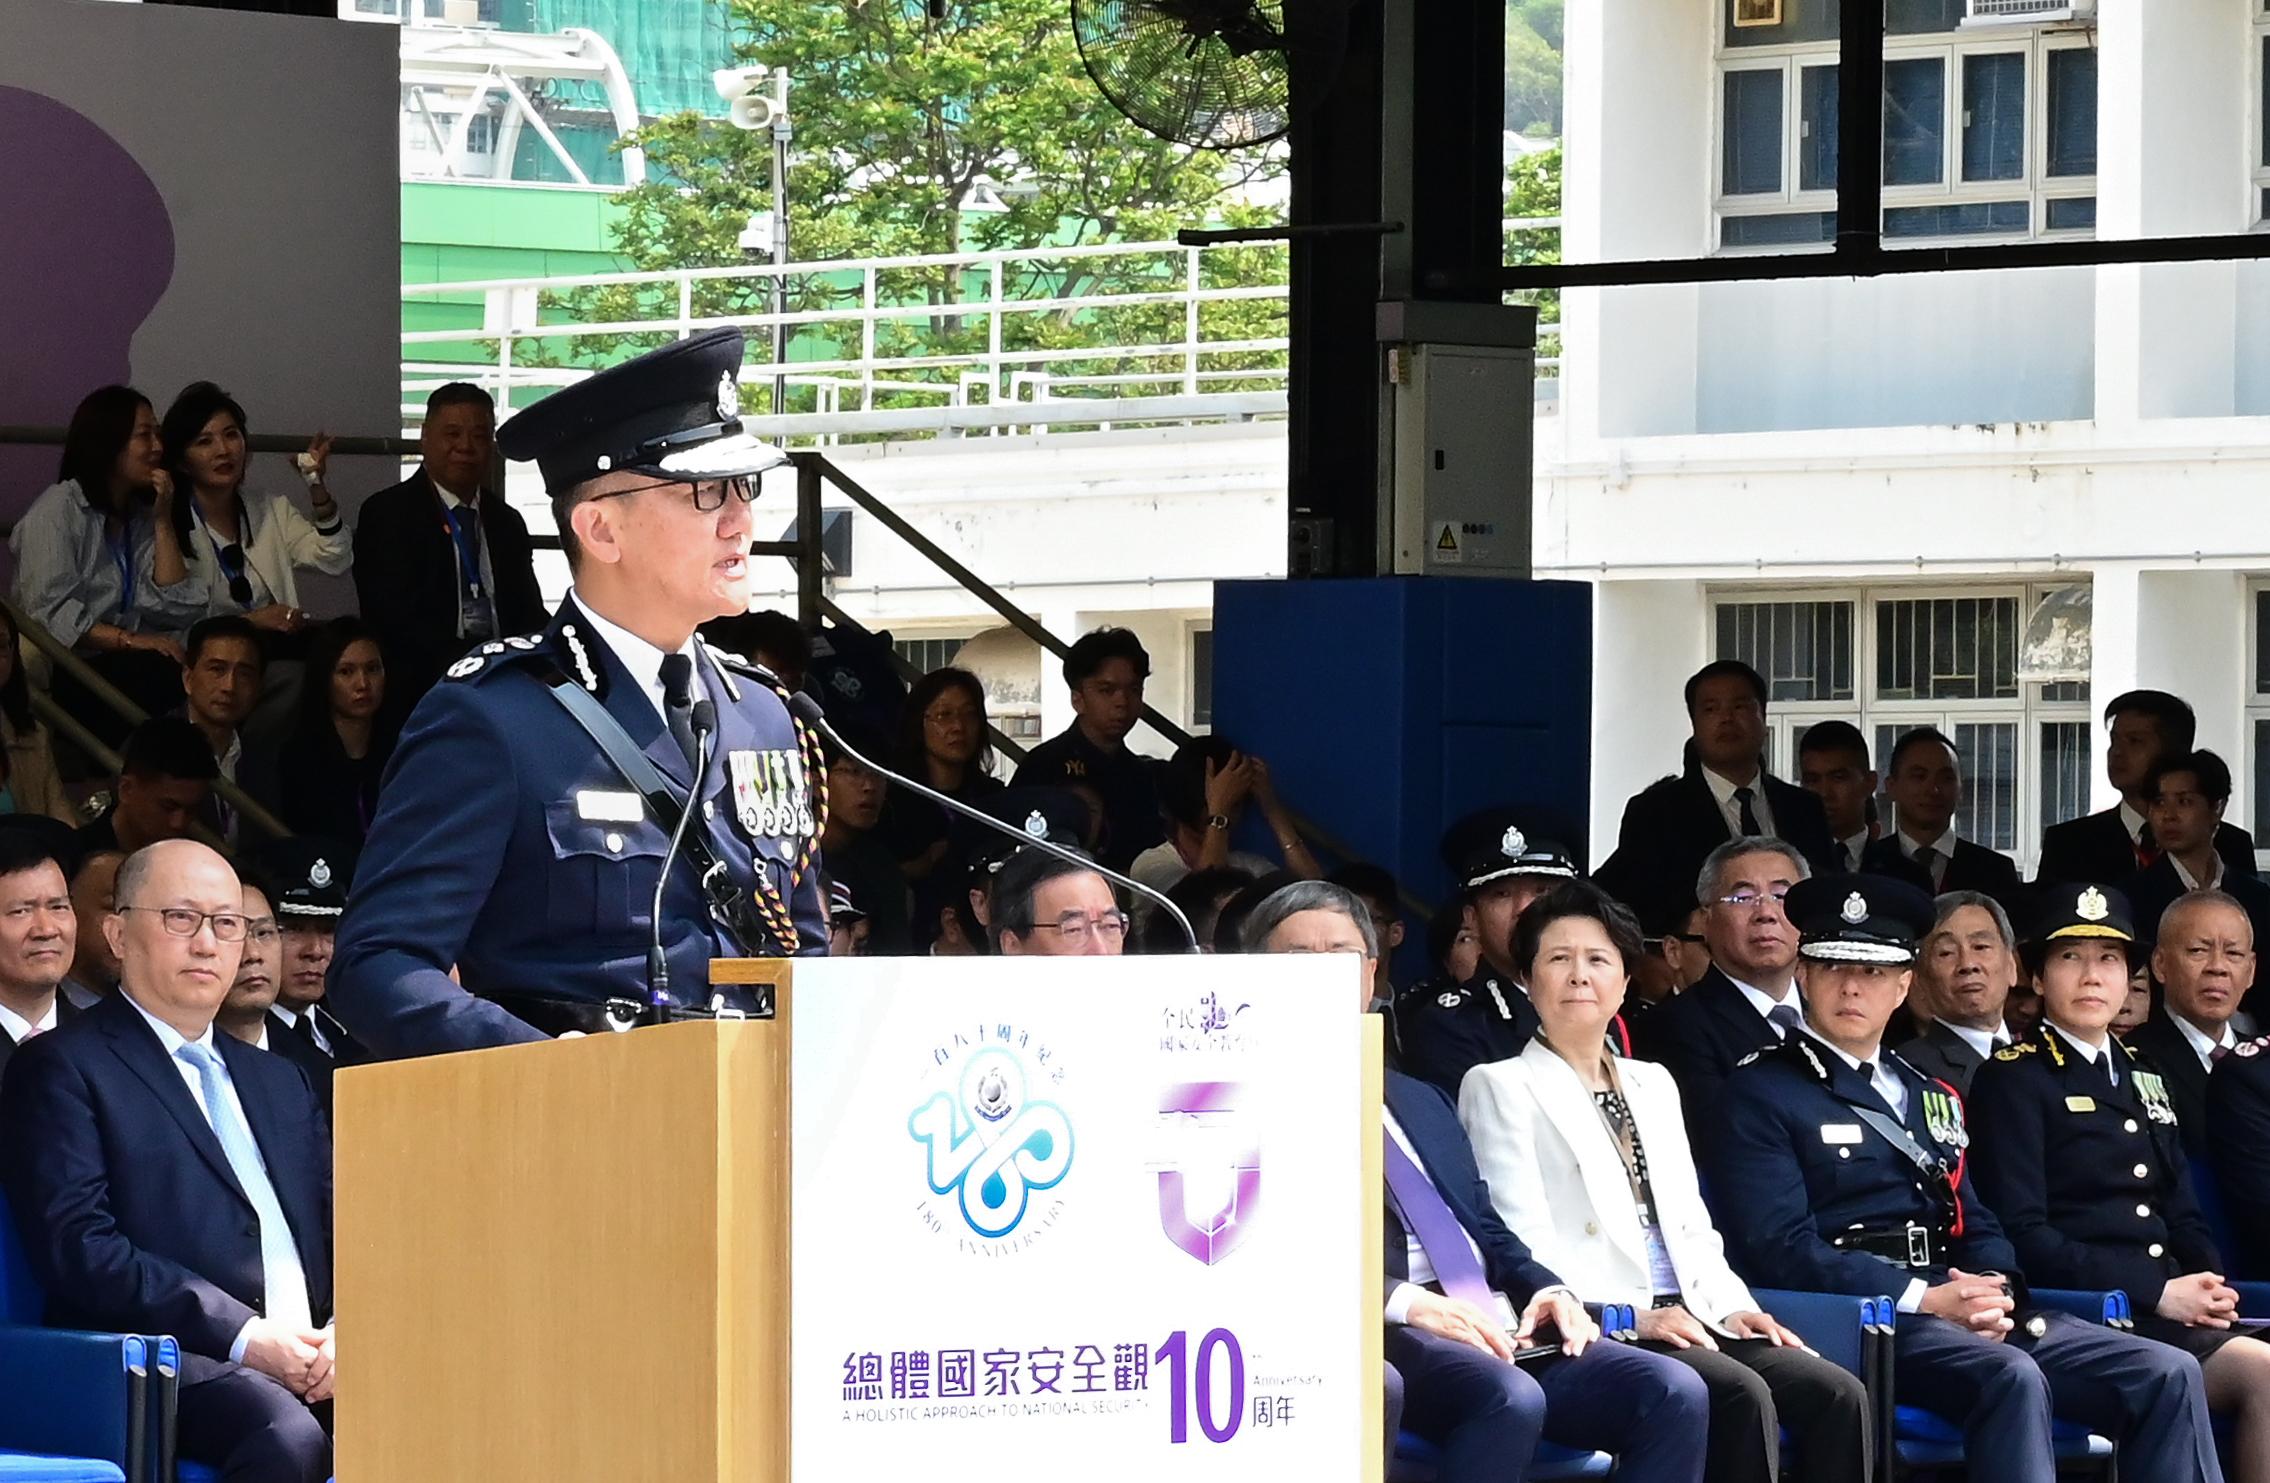 The Commissioner of Police, Mr Siu Chak-yee, speaks at the “National Security Education Day cum Hong Kong Police Force 180th Anniversary Police College Open Day” today (April 13).